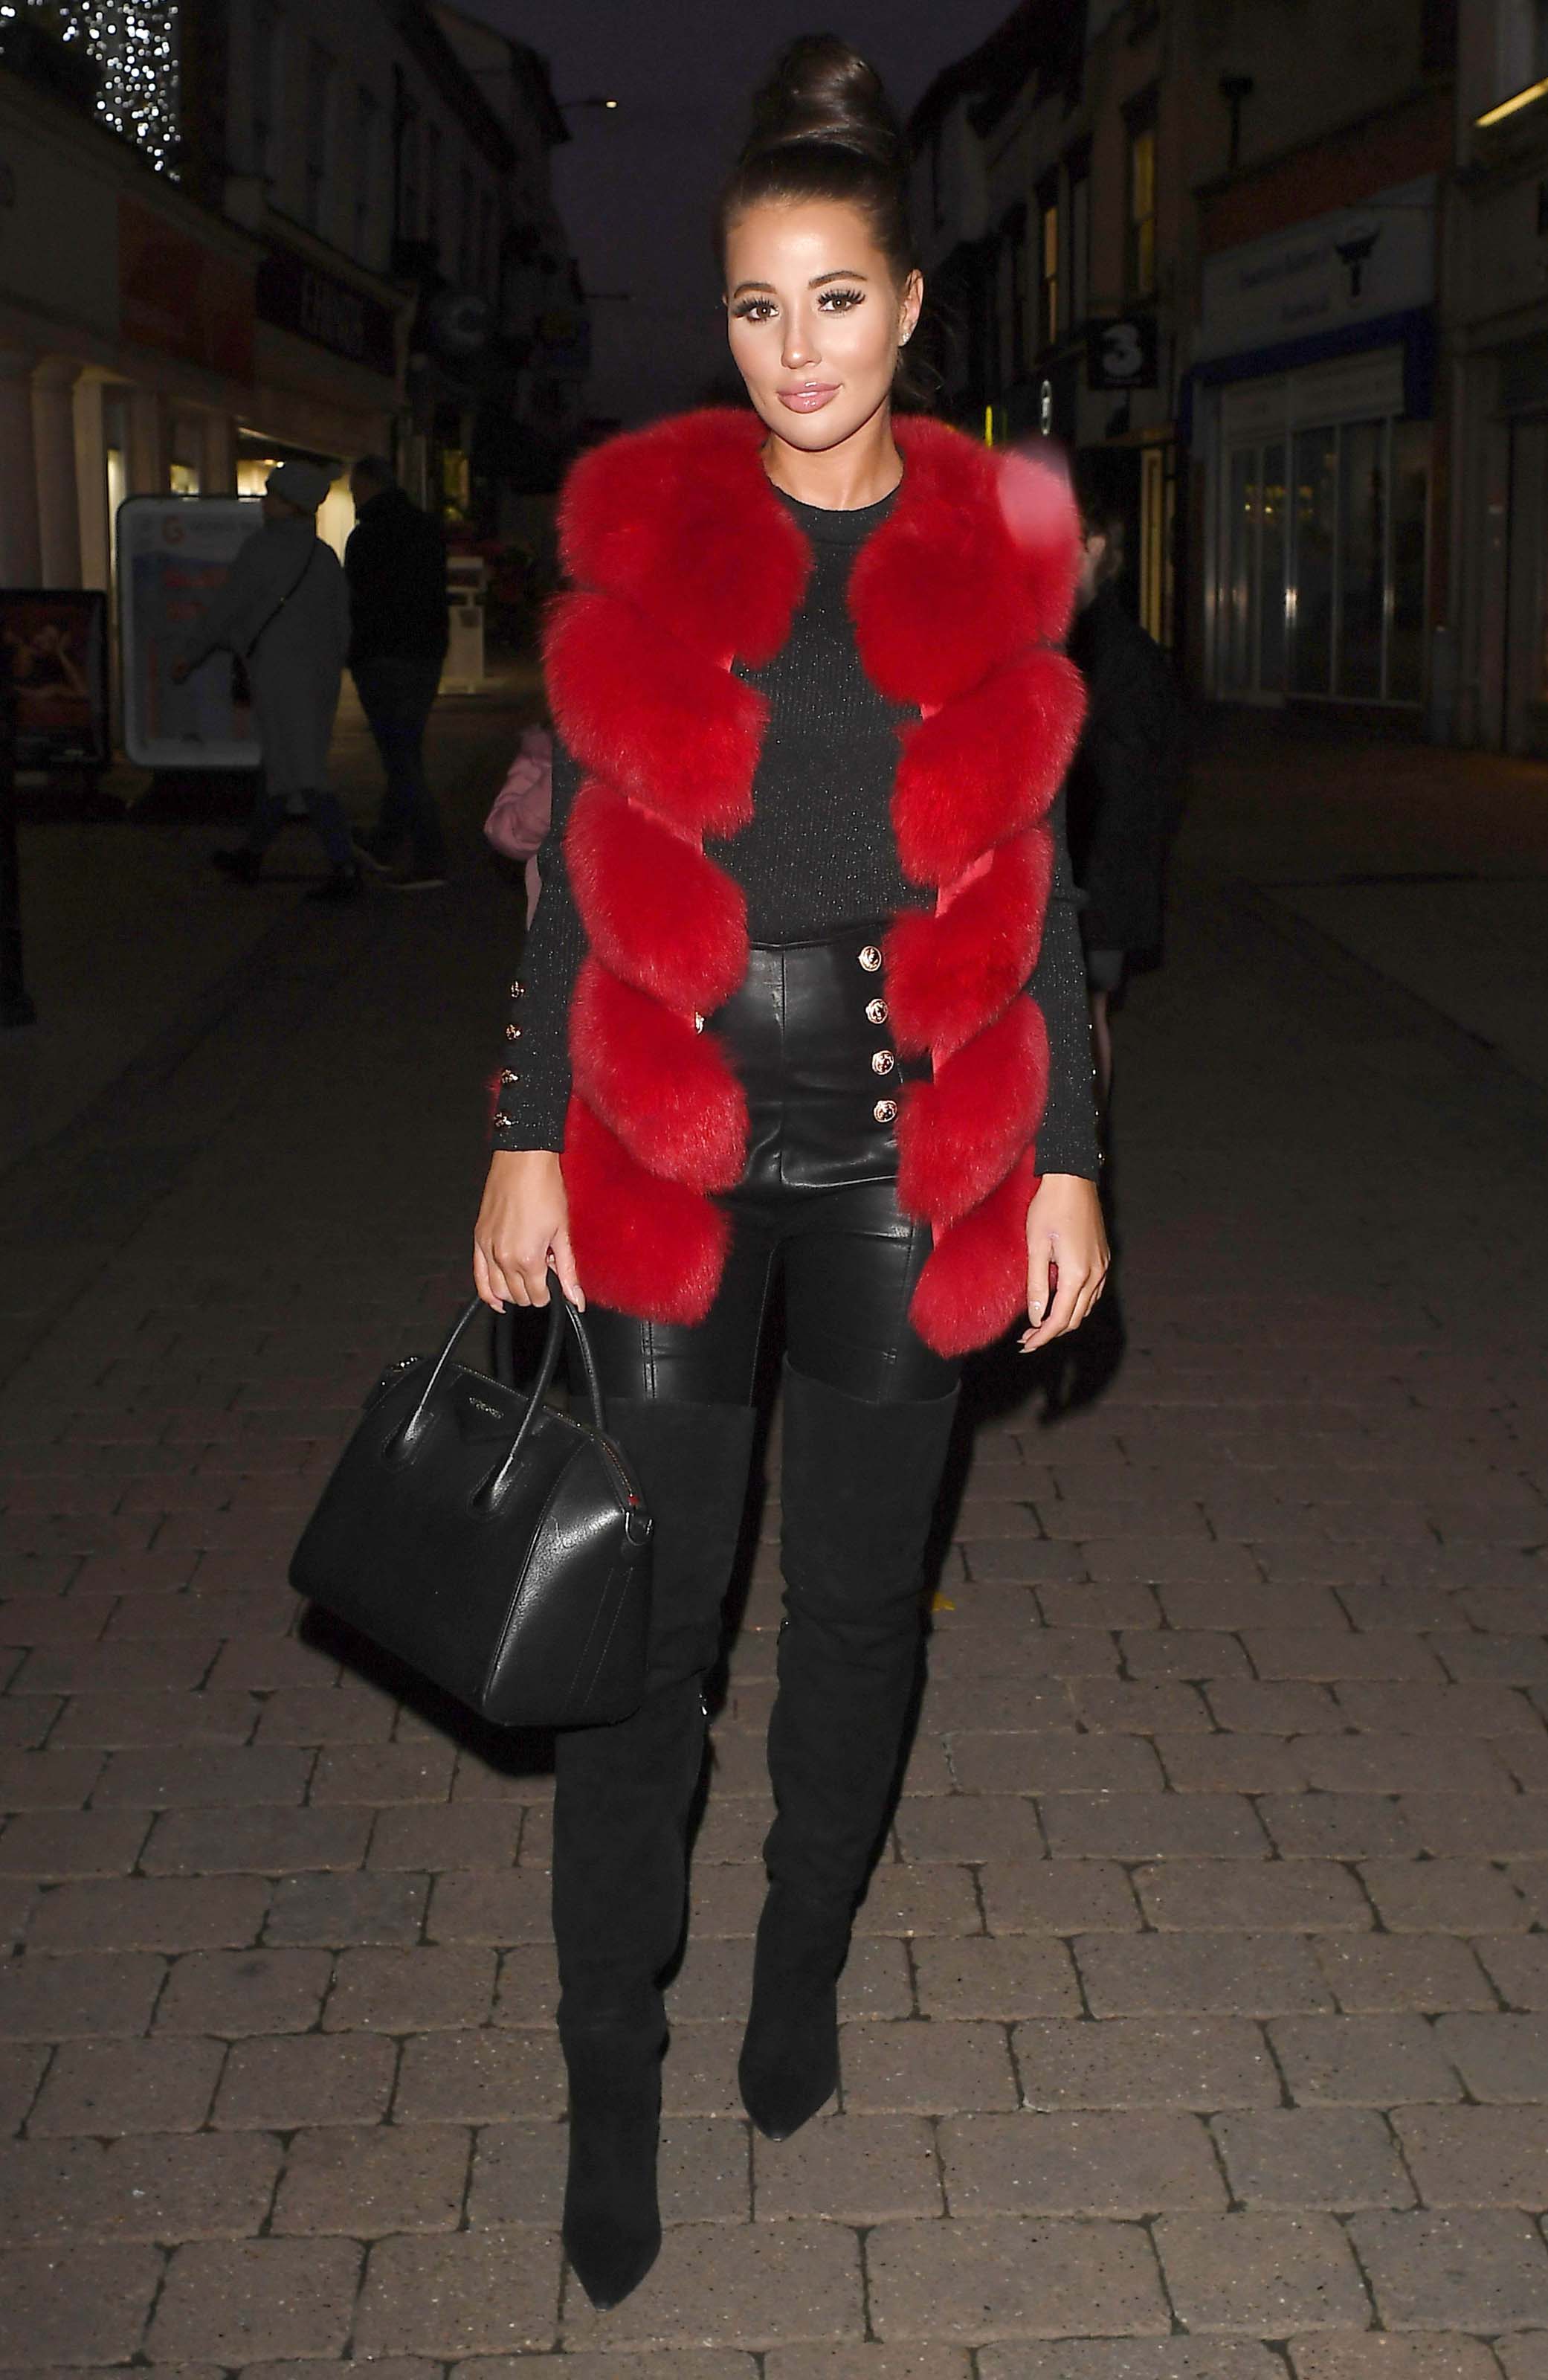 Yazmin Oukhellou at The Only Way is Essex Christmas Special filming